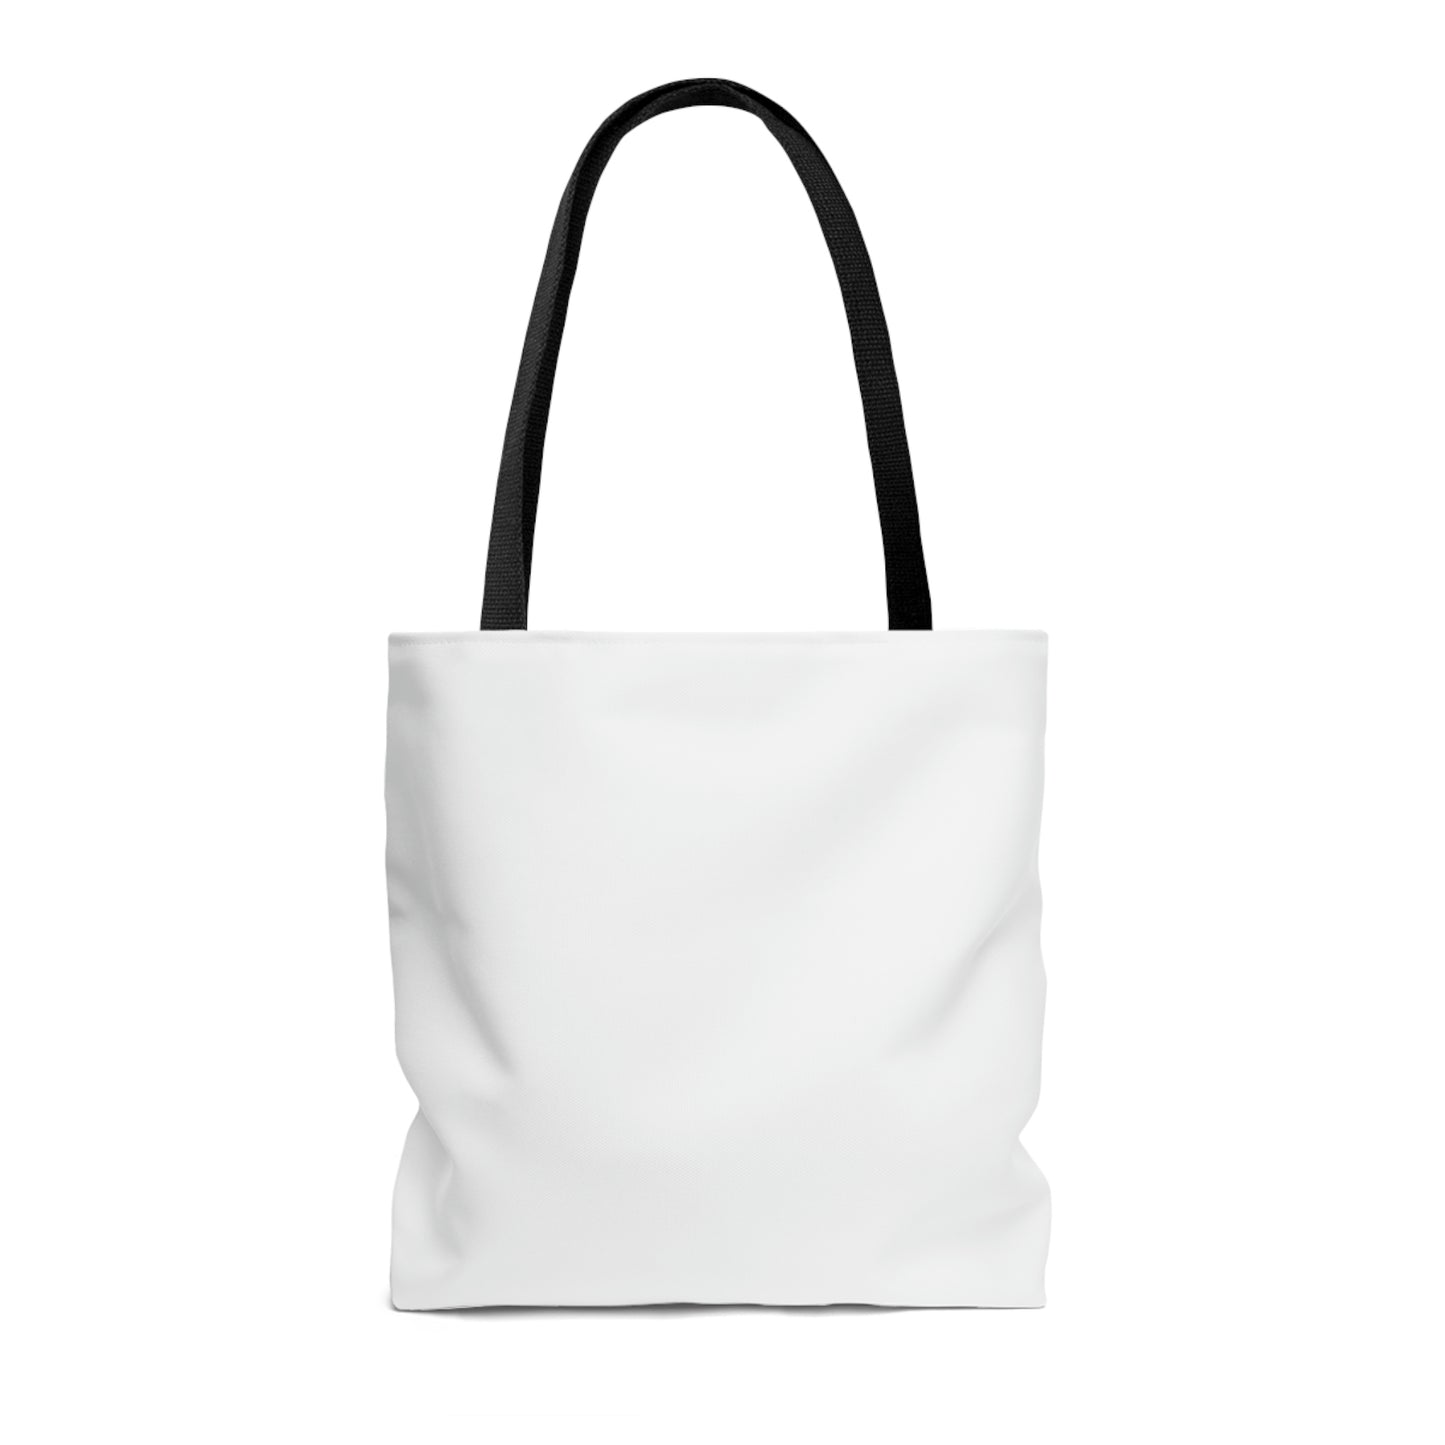 The Bible as Simple as ABC T AOP Tote Bag